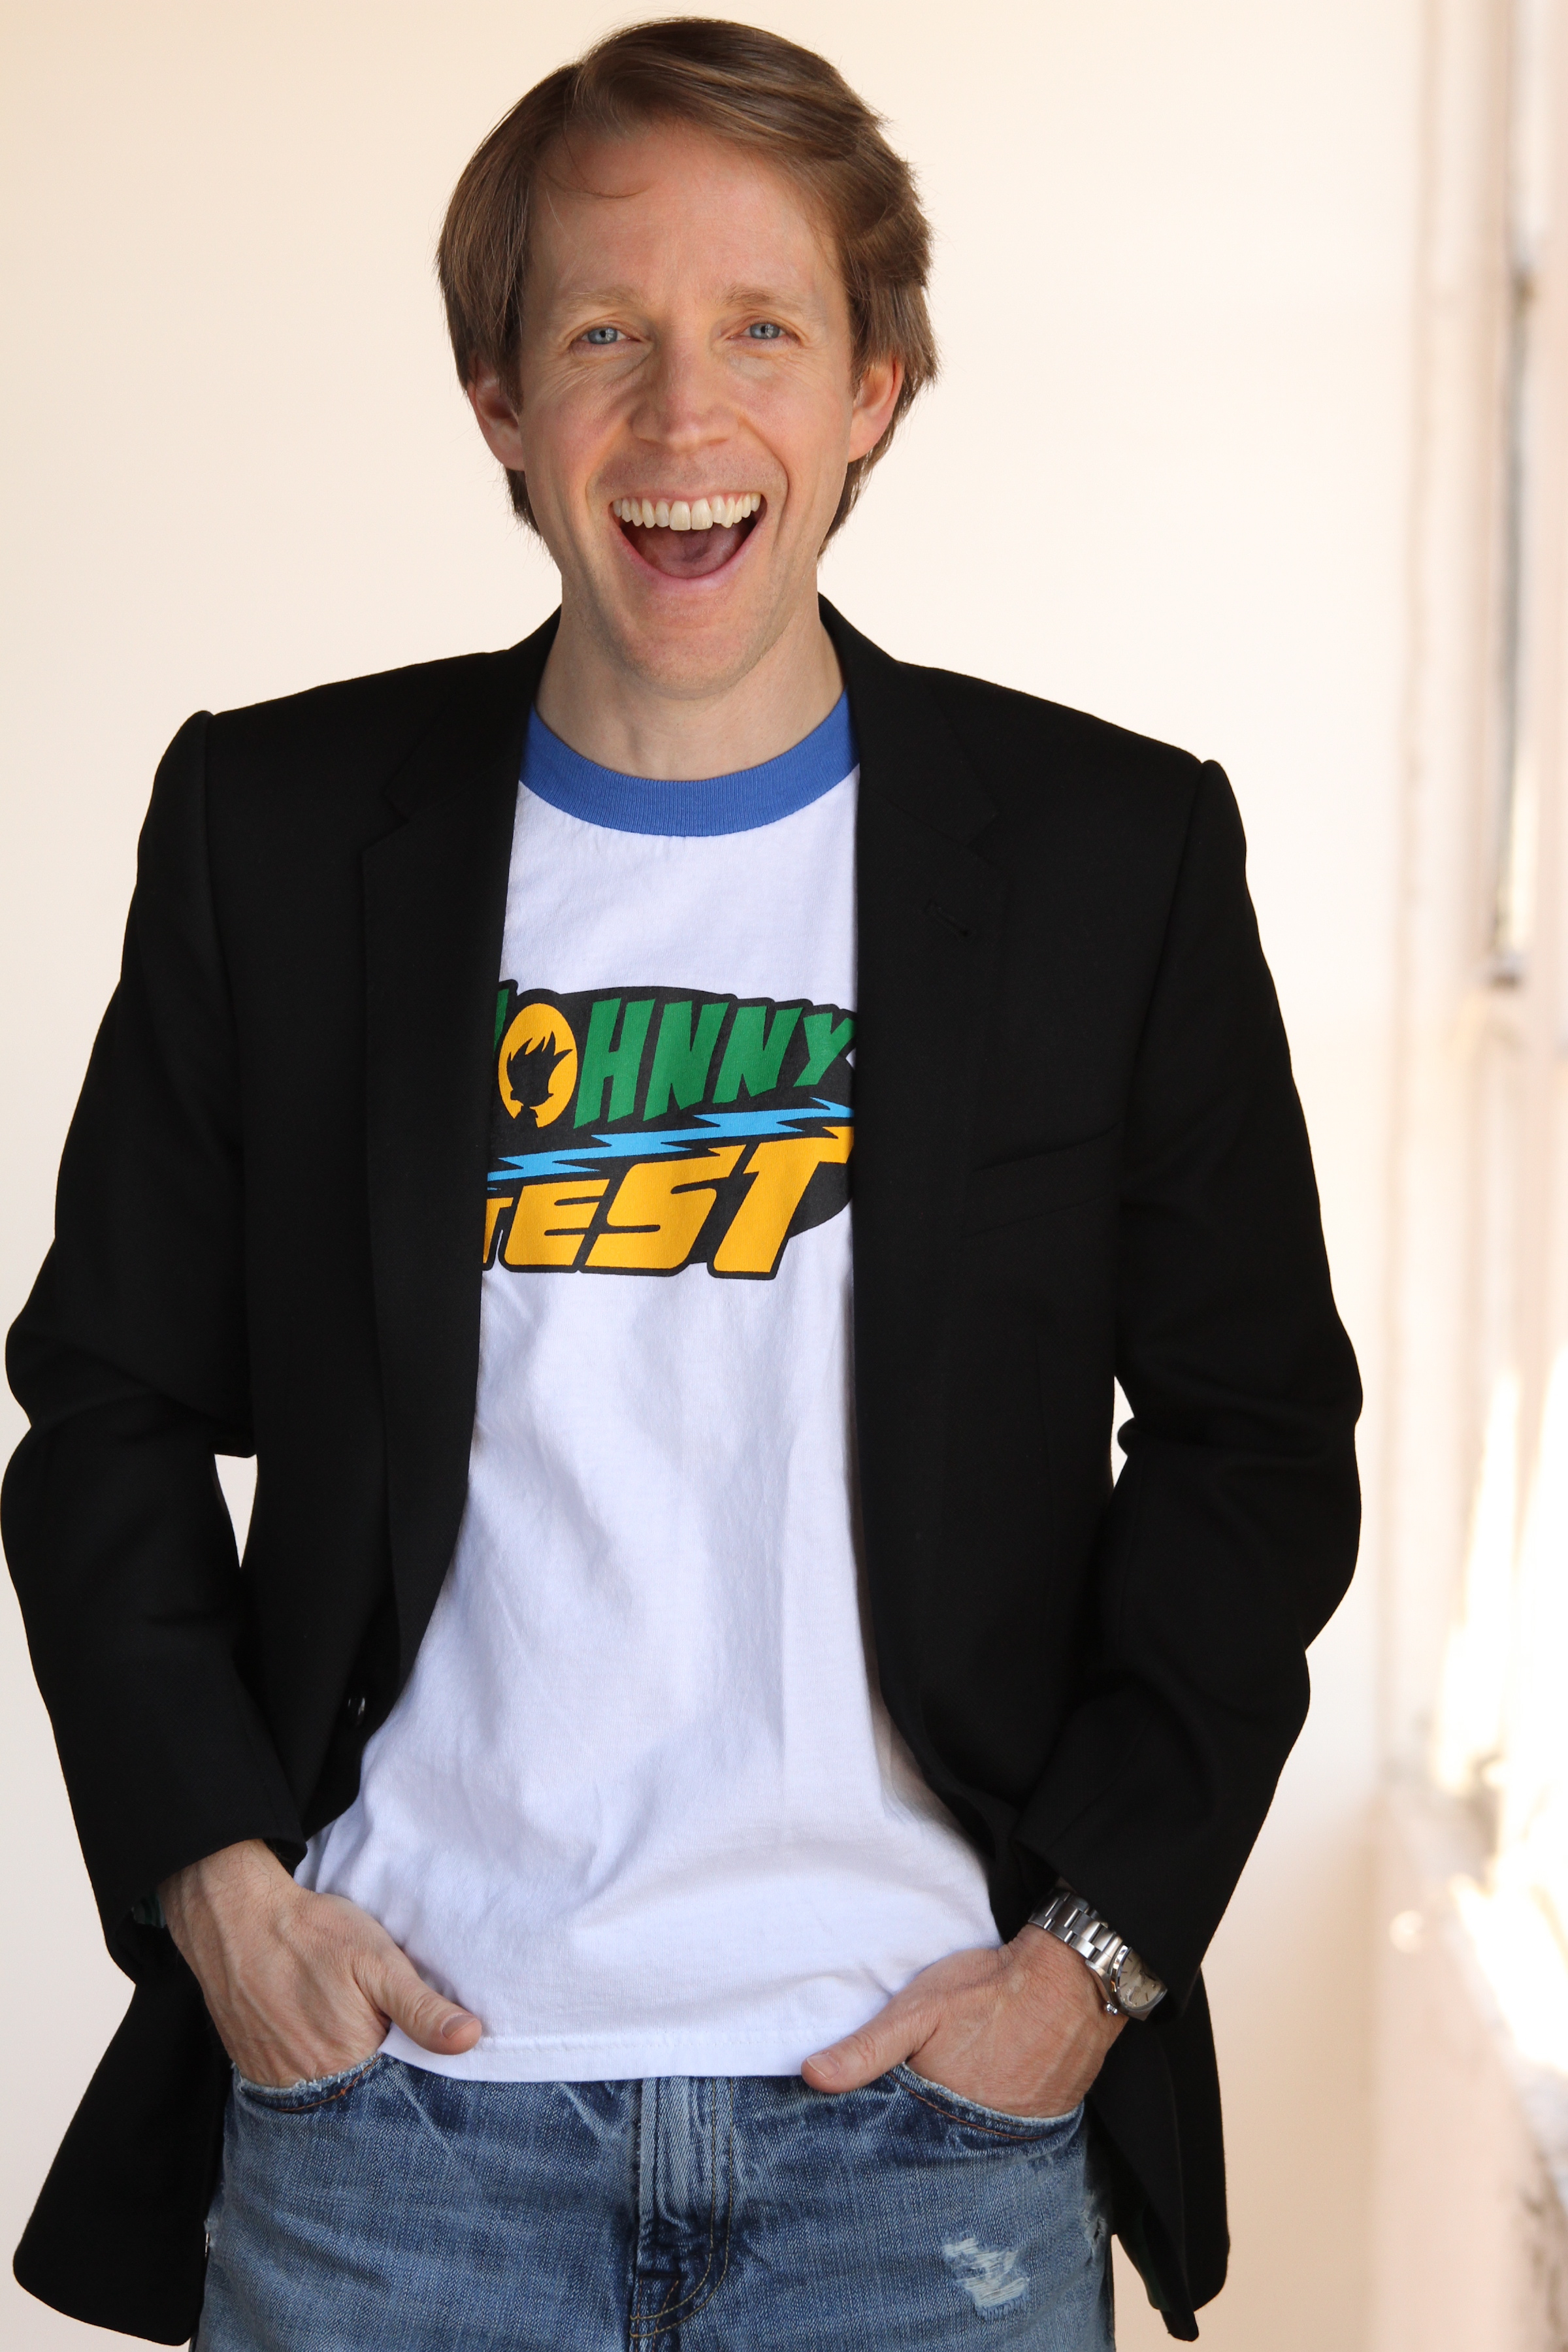 James Arnold Taylor is the voice of Johnny Test